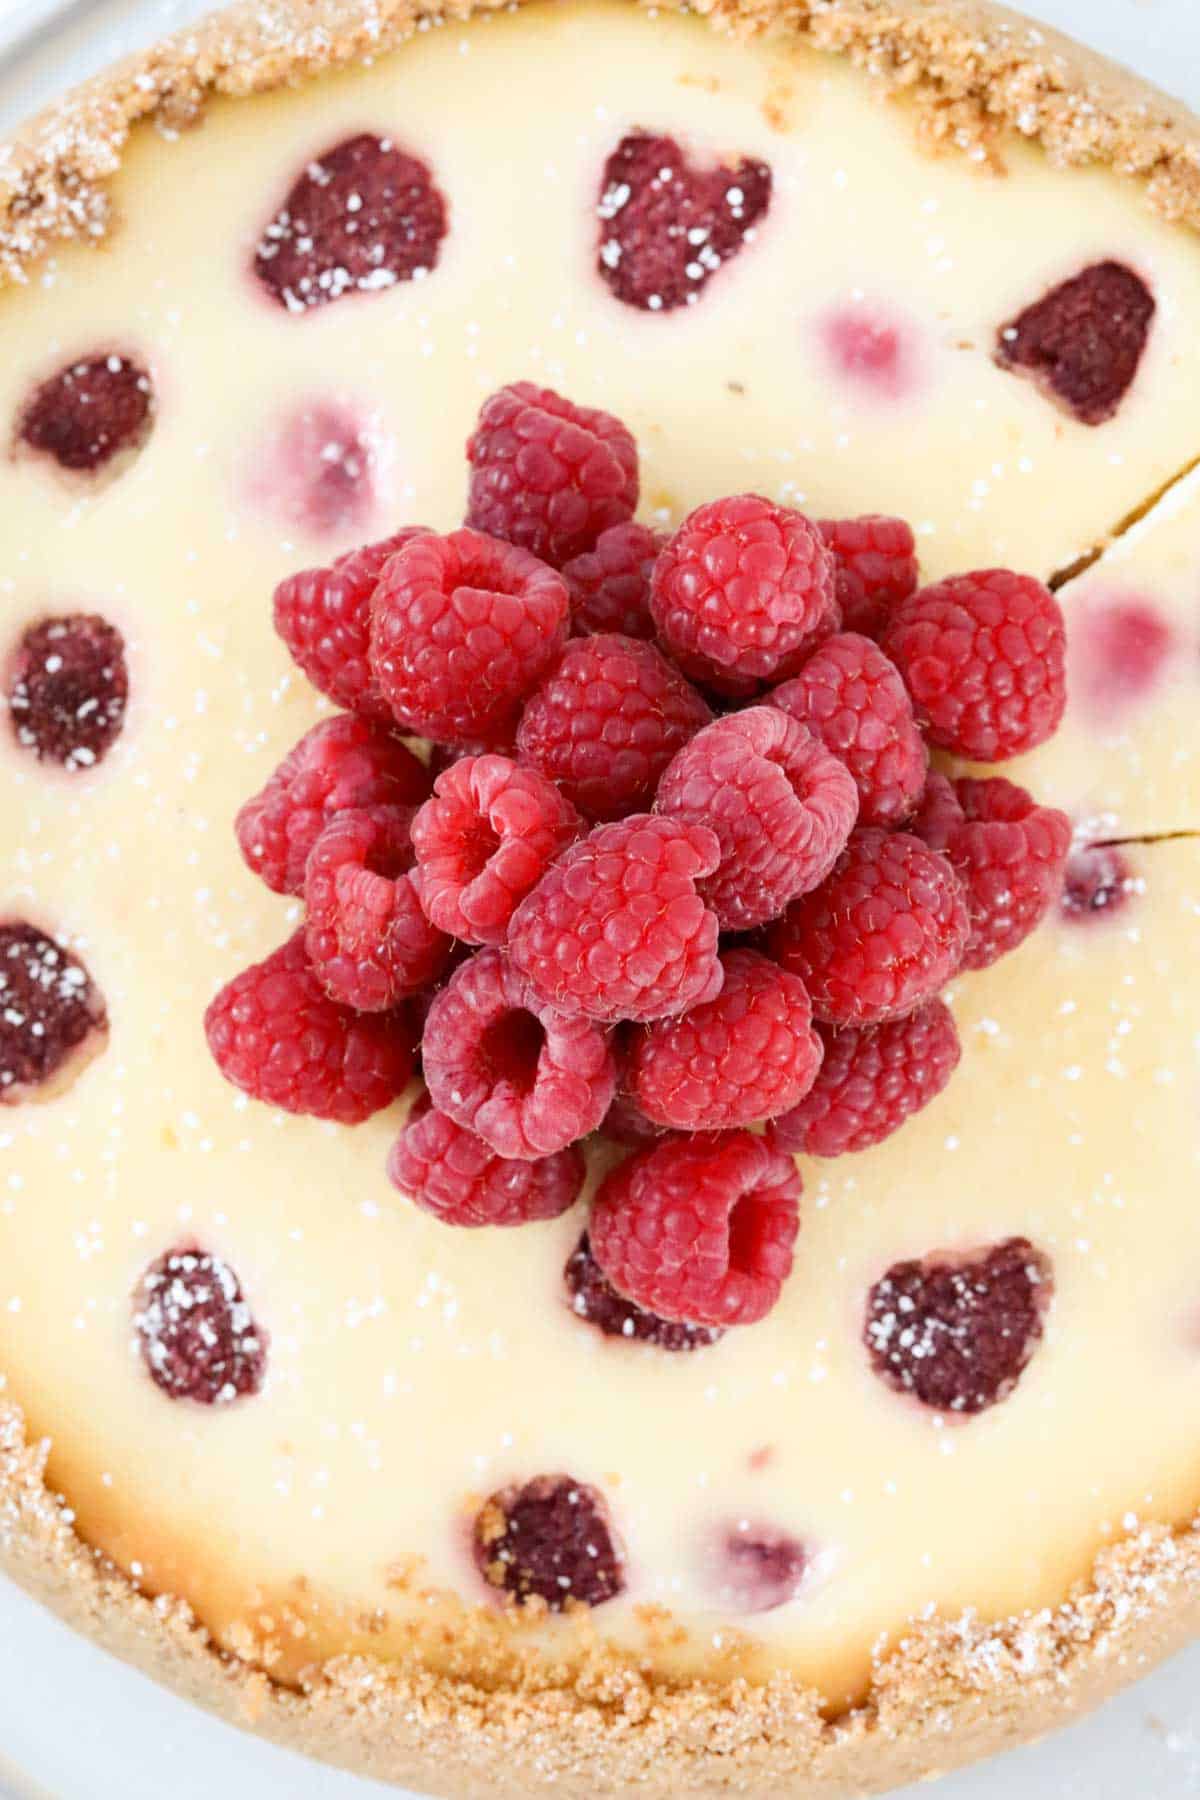 A pile of fresh raspberiies in the centre of baked cheesecake.